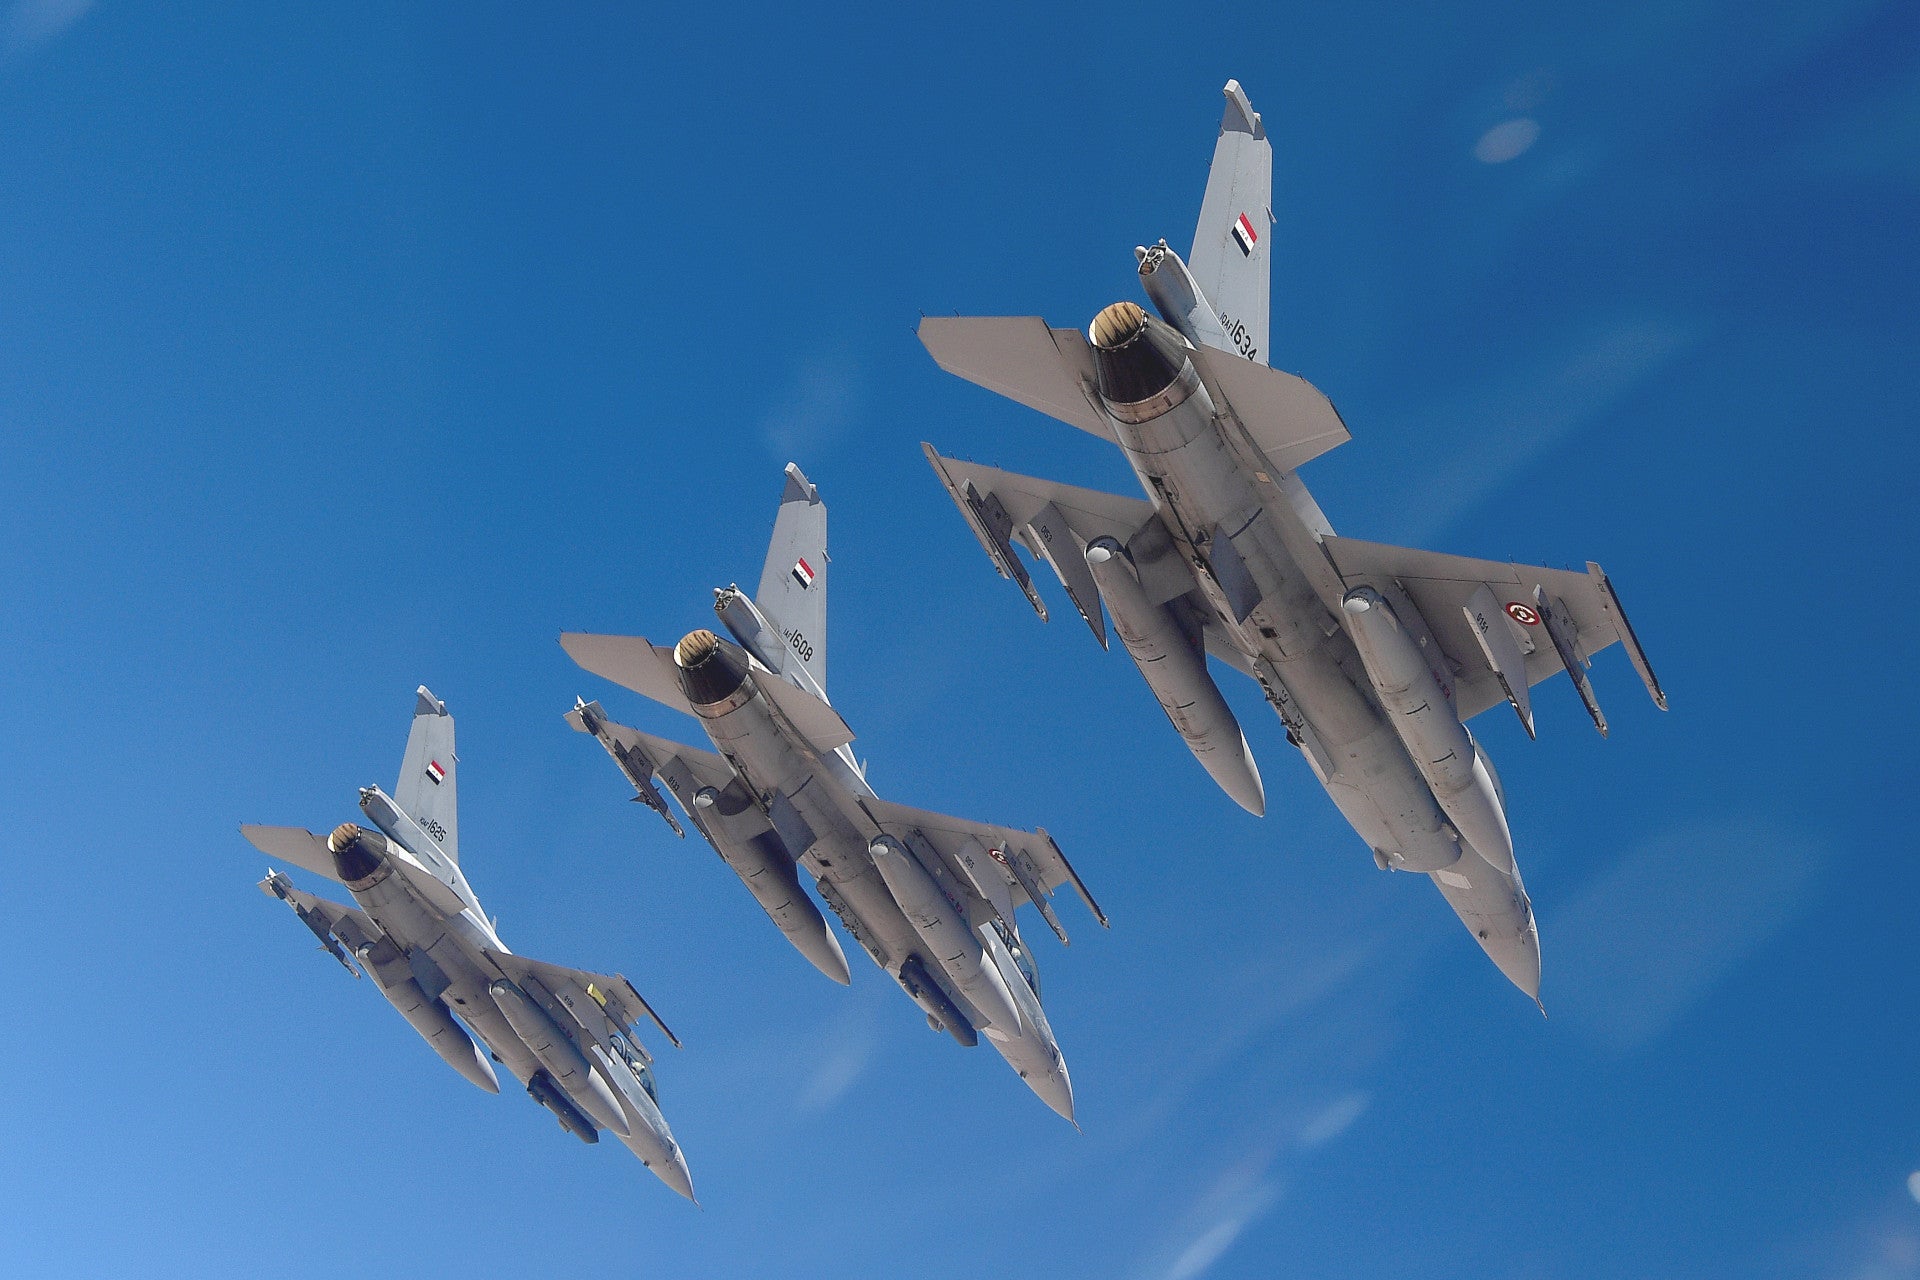 Three Iraqi Air Force F-16 Fighting Falcons fly in formation during a training sortie above an undisclosed location, July 18, 2019. U.S. Airmen from the 370th Air Expeditionary Advisory Group partner with Iraqi airmen to conduct advise and assist operations to enable the continuous establishment of security across Iraq. The Coalition operates in close coordination with and by the invitation of the Government of Iraq. (U.S. Air Force photo by Staff Sgt. Chris Drzazgowski)